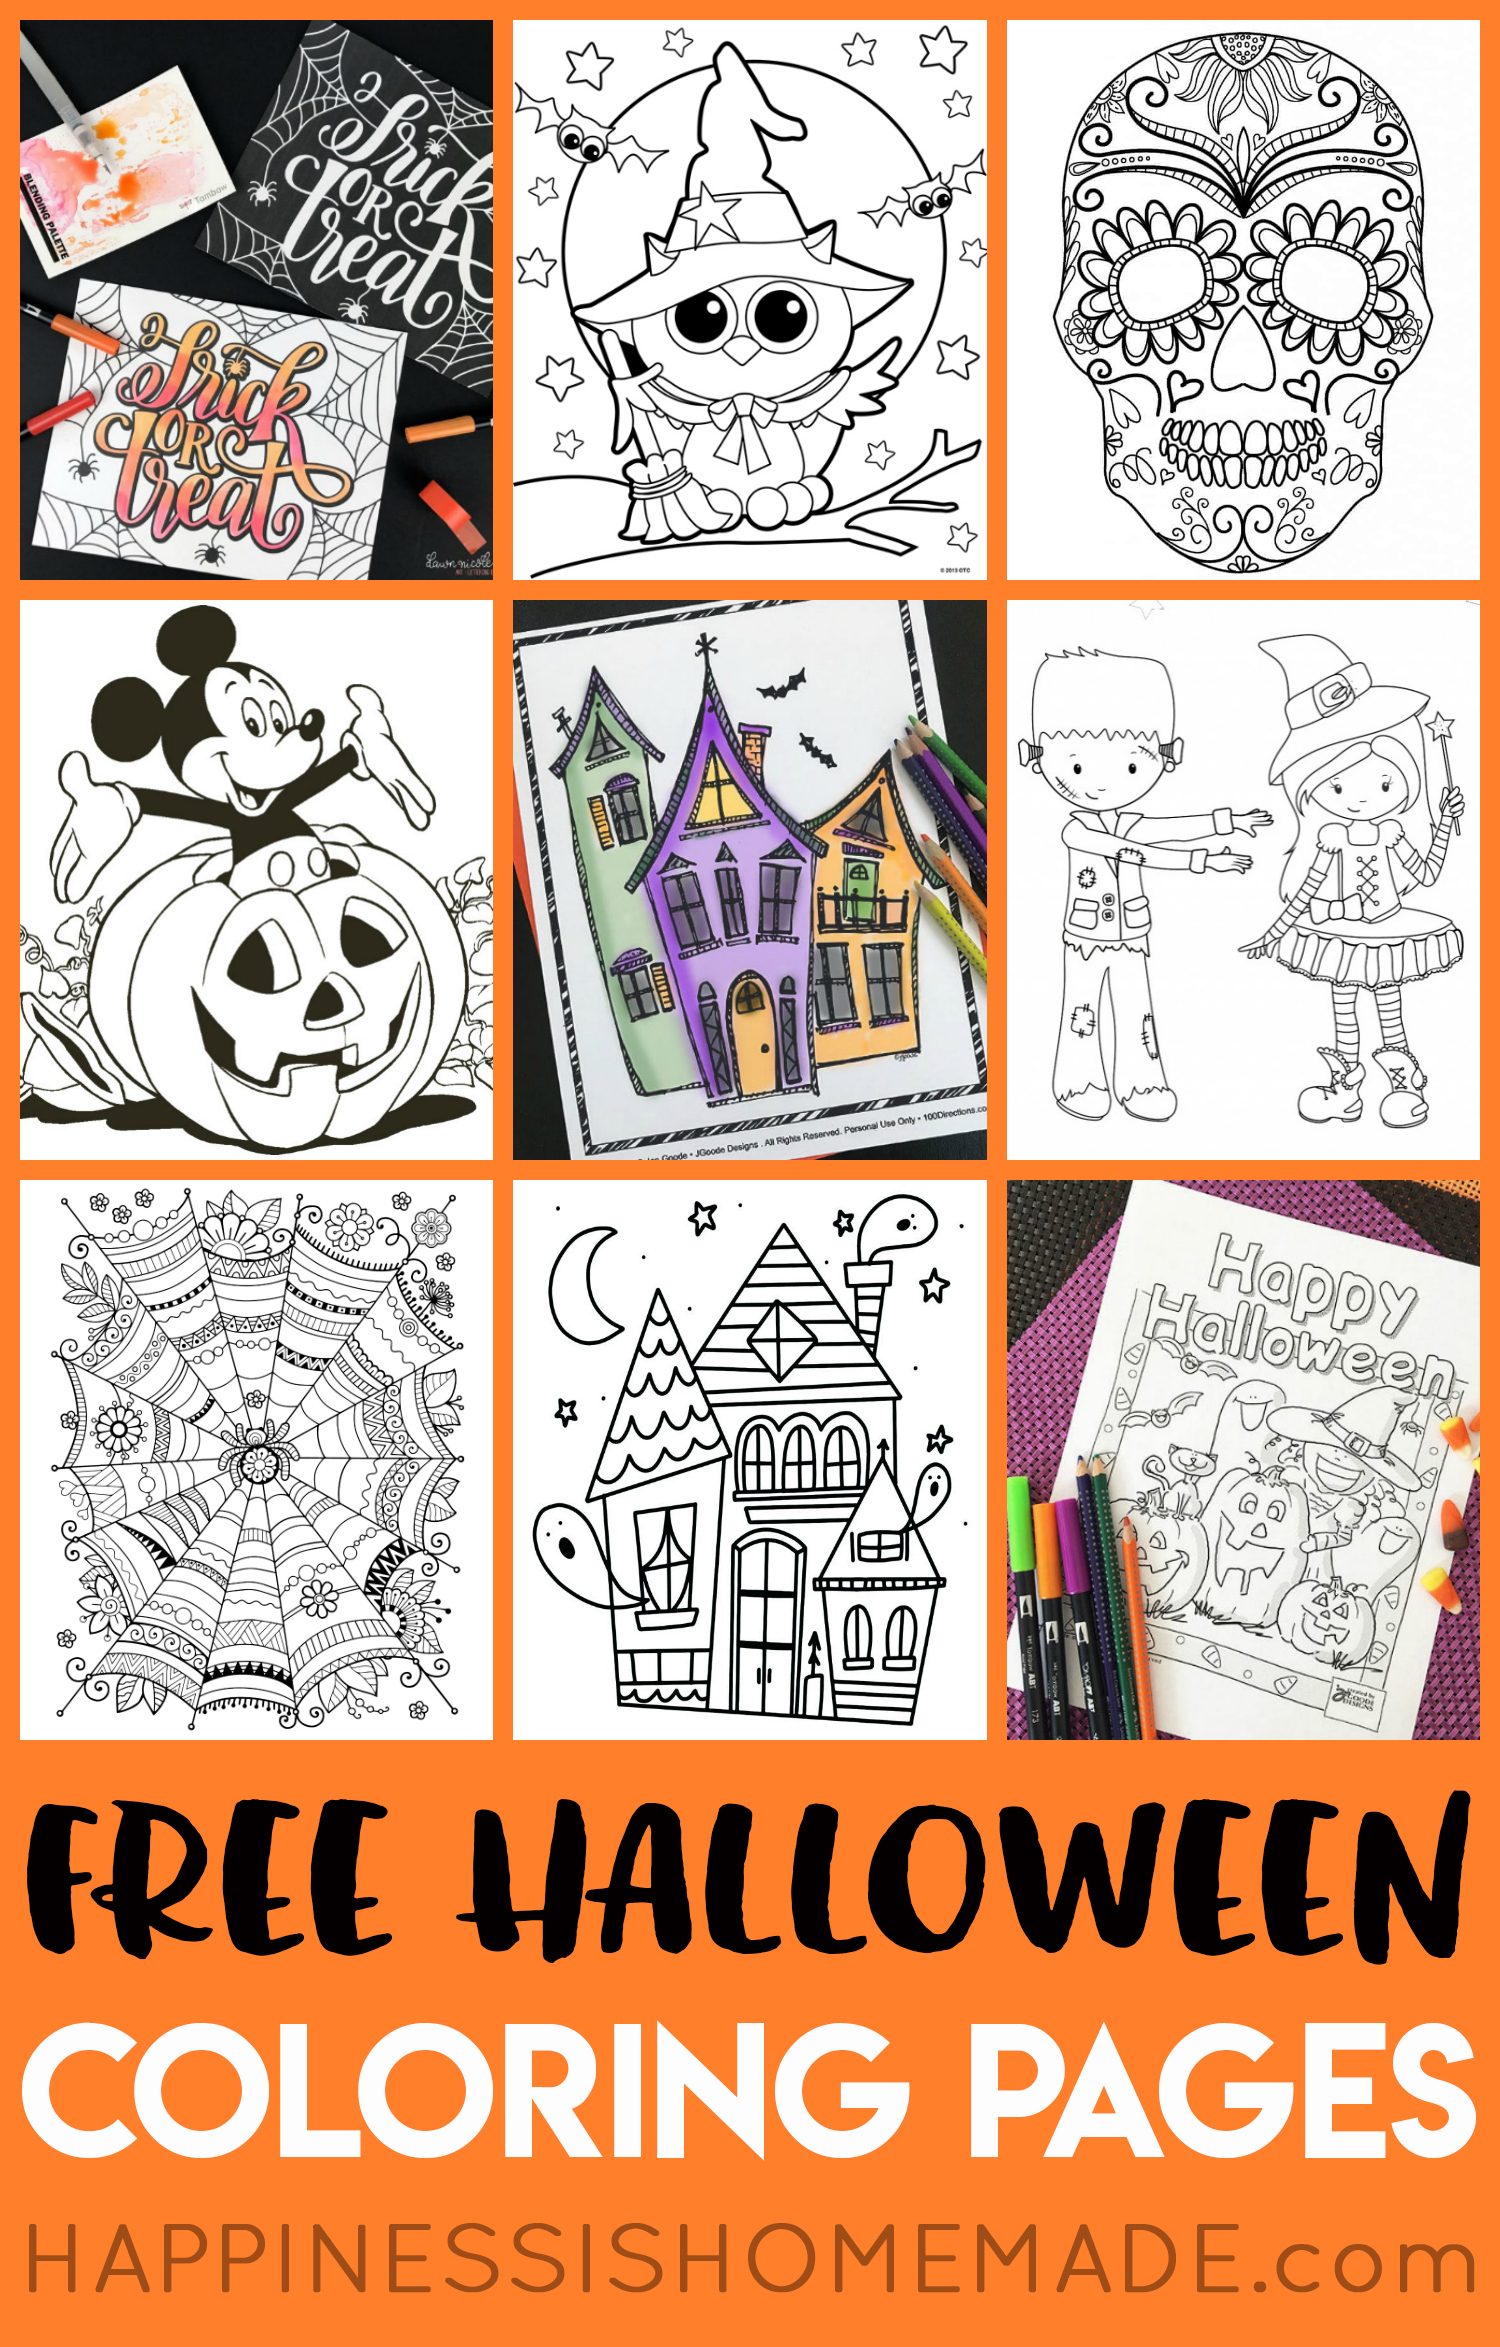 Free Halloween Coloring Pages For Adults &amp;amp; Kids - Happiness Is Homemade - Printable Halloween Puzzle Pages